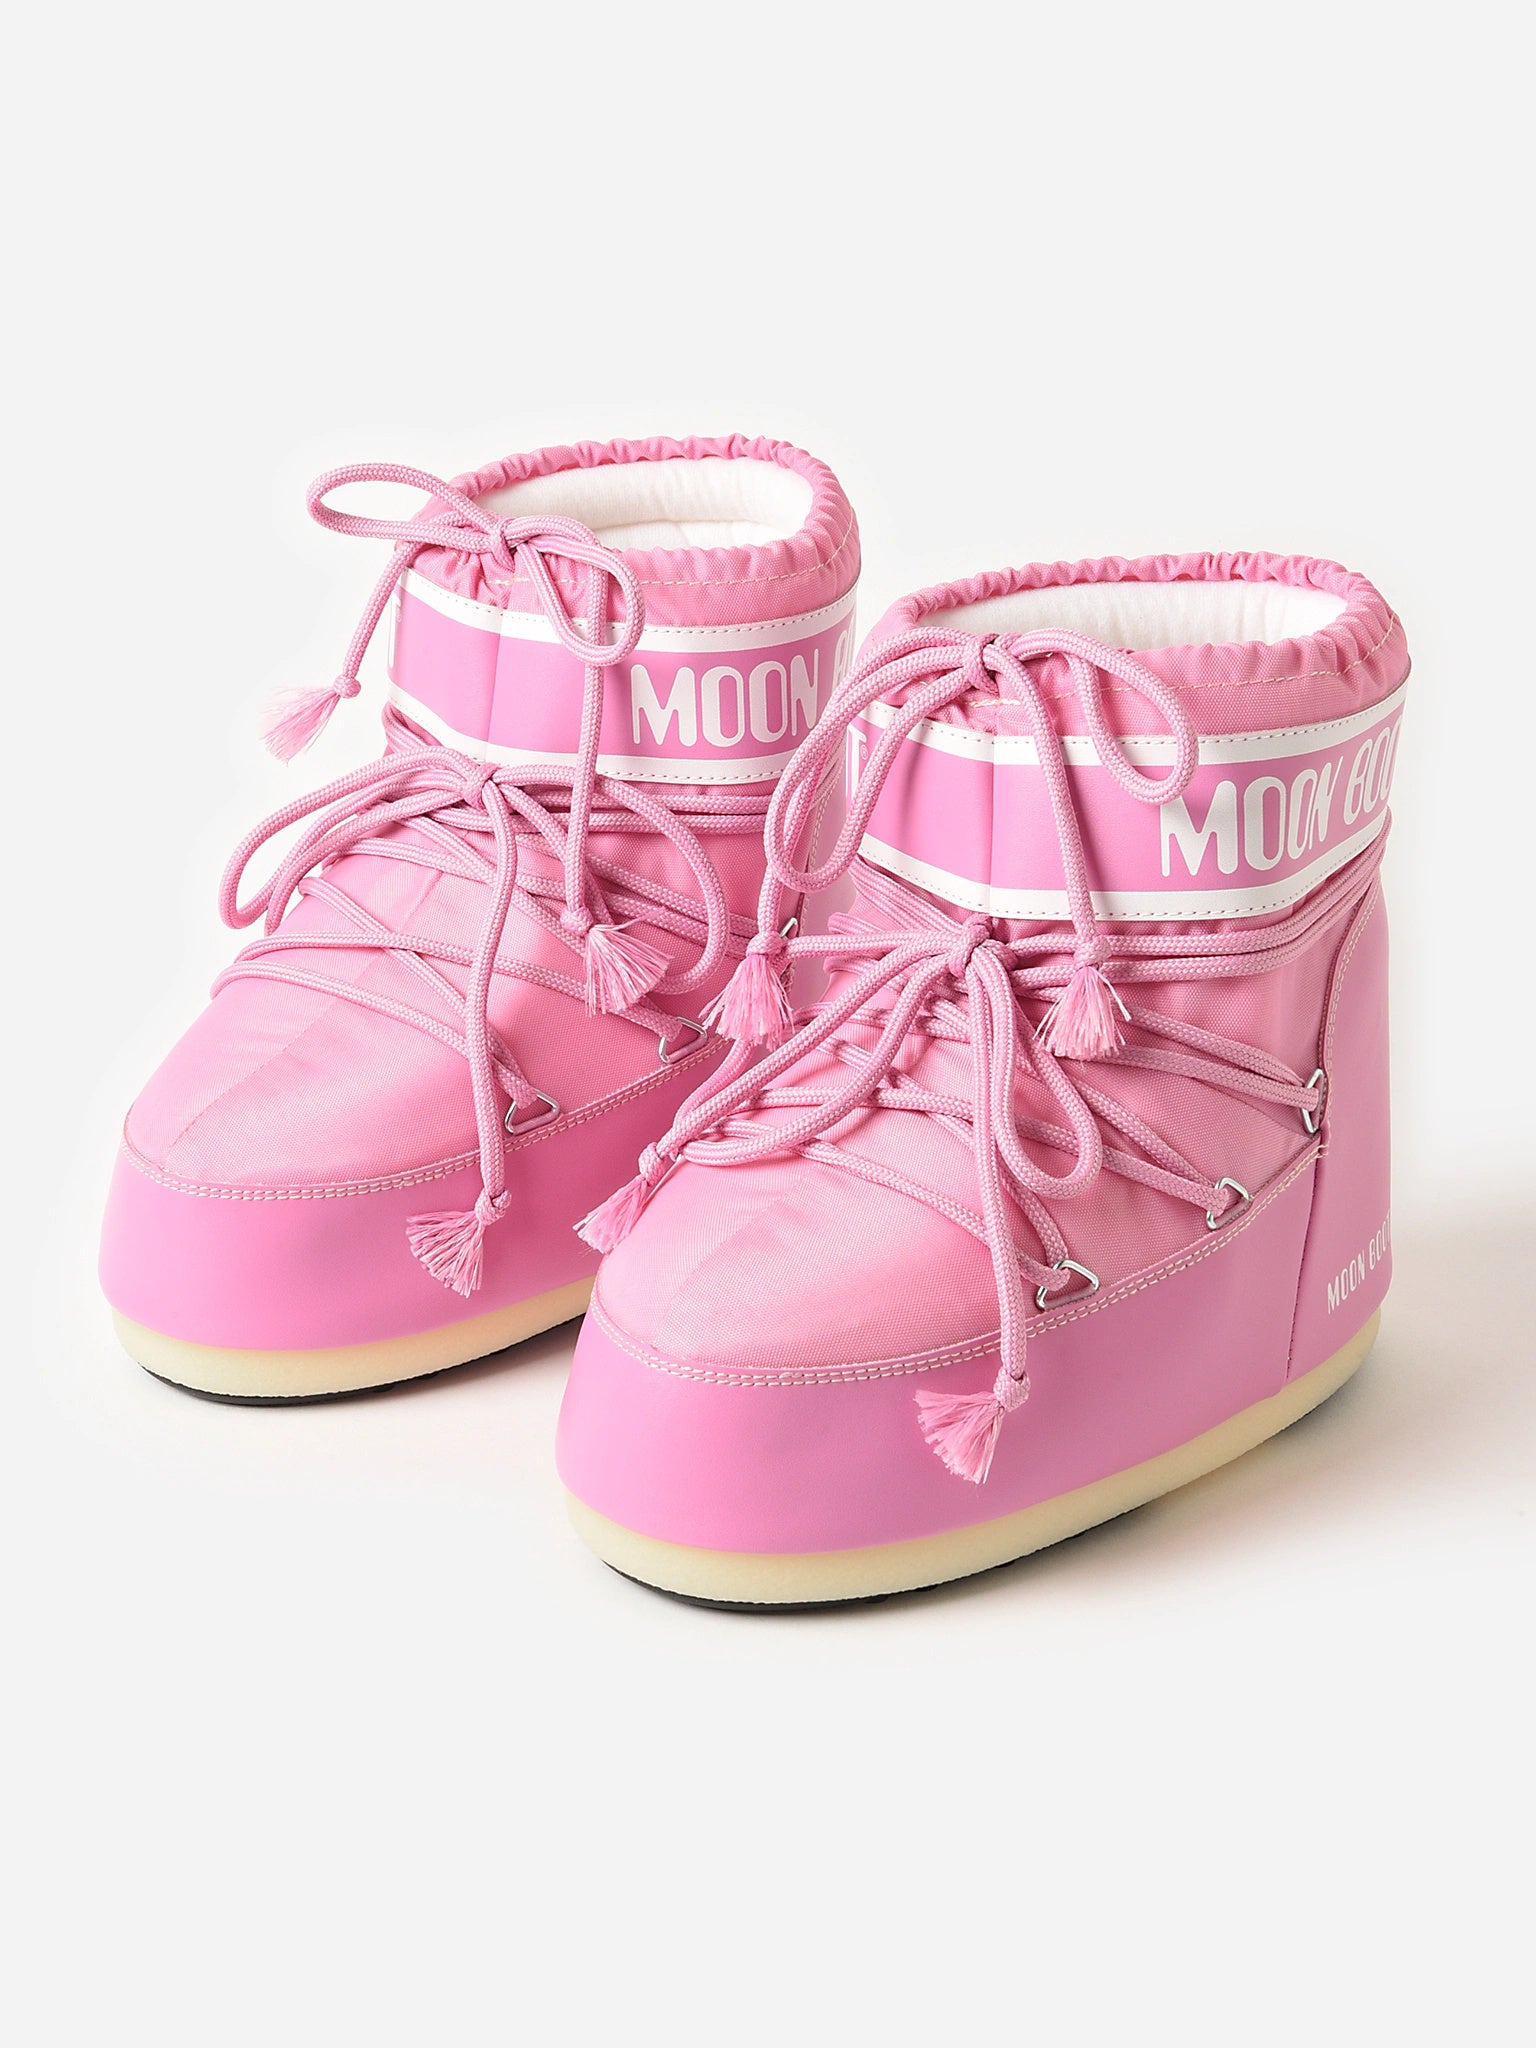 Nylon snow boots in pink - Moon Boot Kids